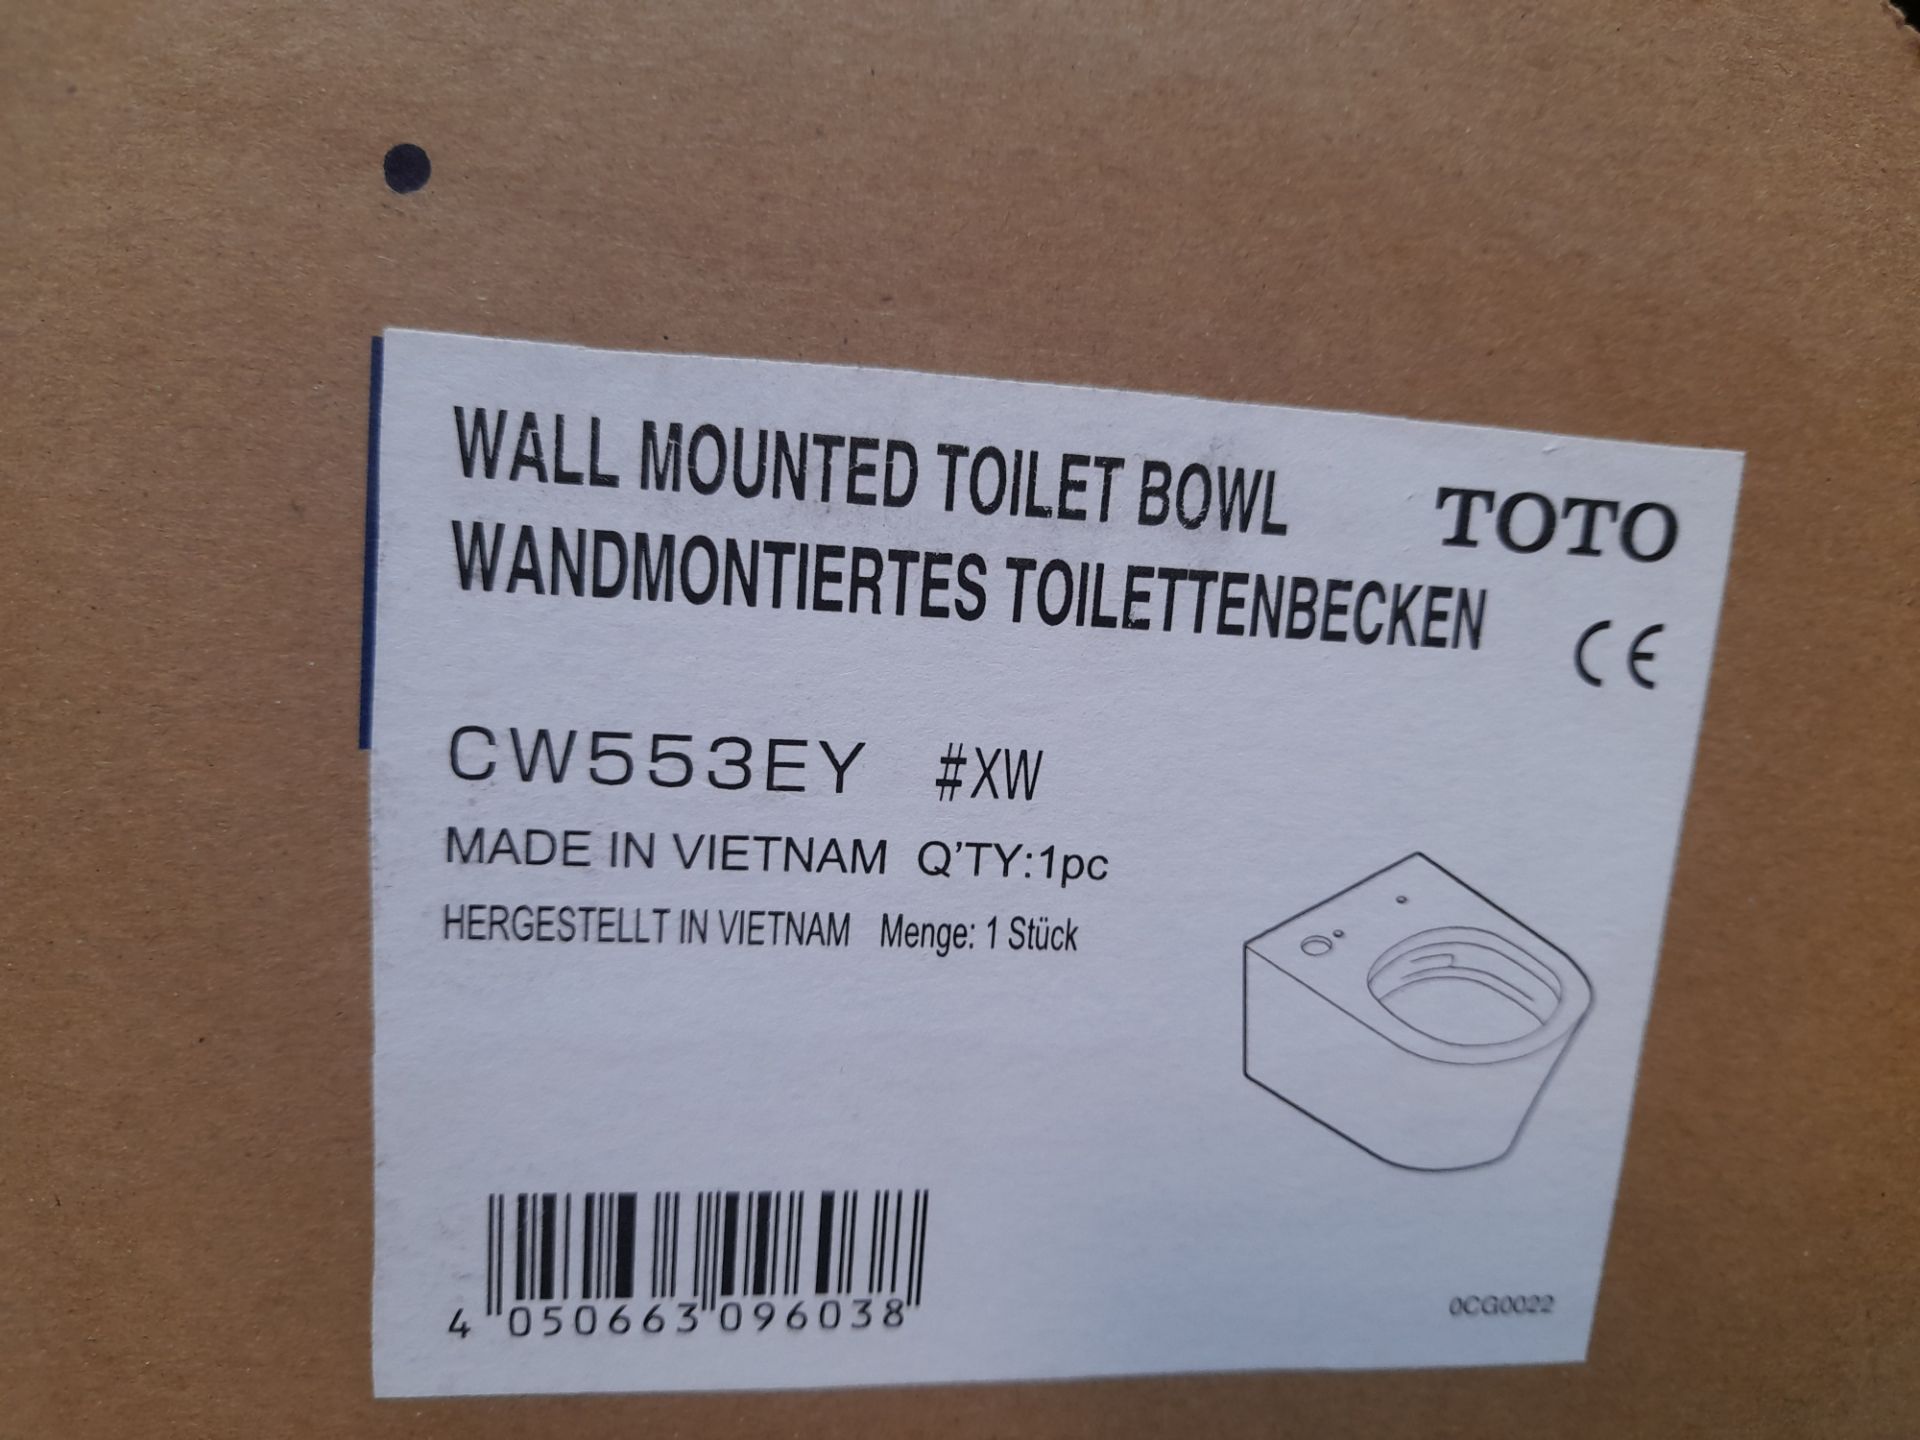 Toto Wall Mounted Toilet Bowl (CW553EY) (Boxed) - Image 2 of 2